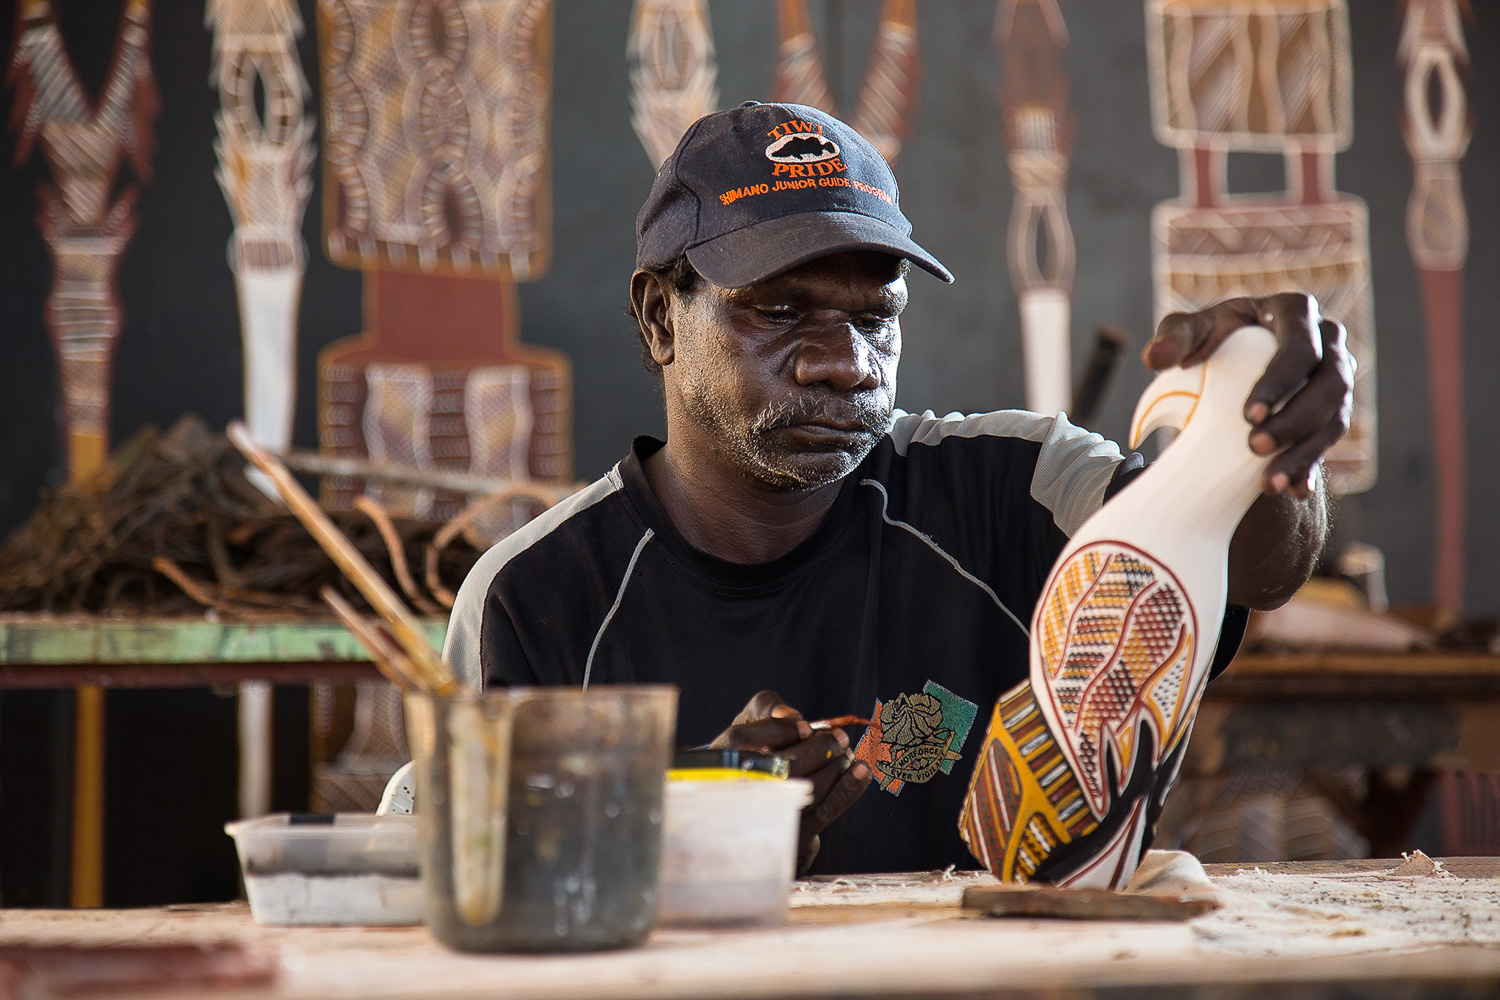 Tiwi bird painted with ochre